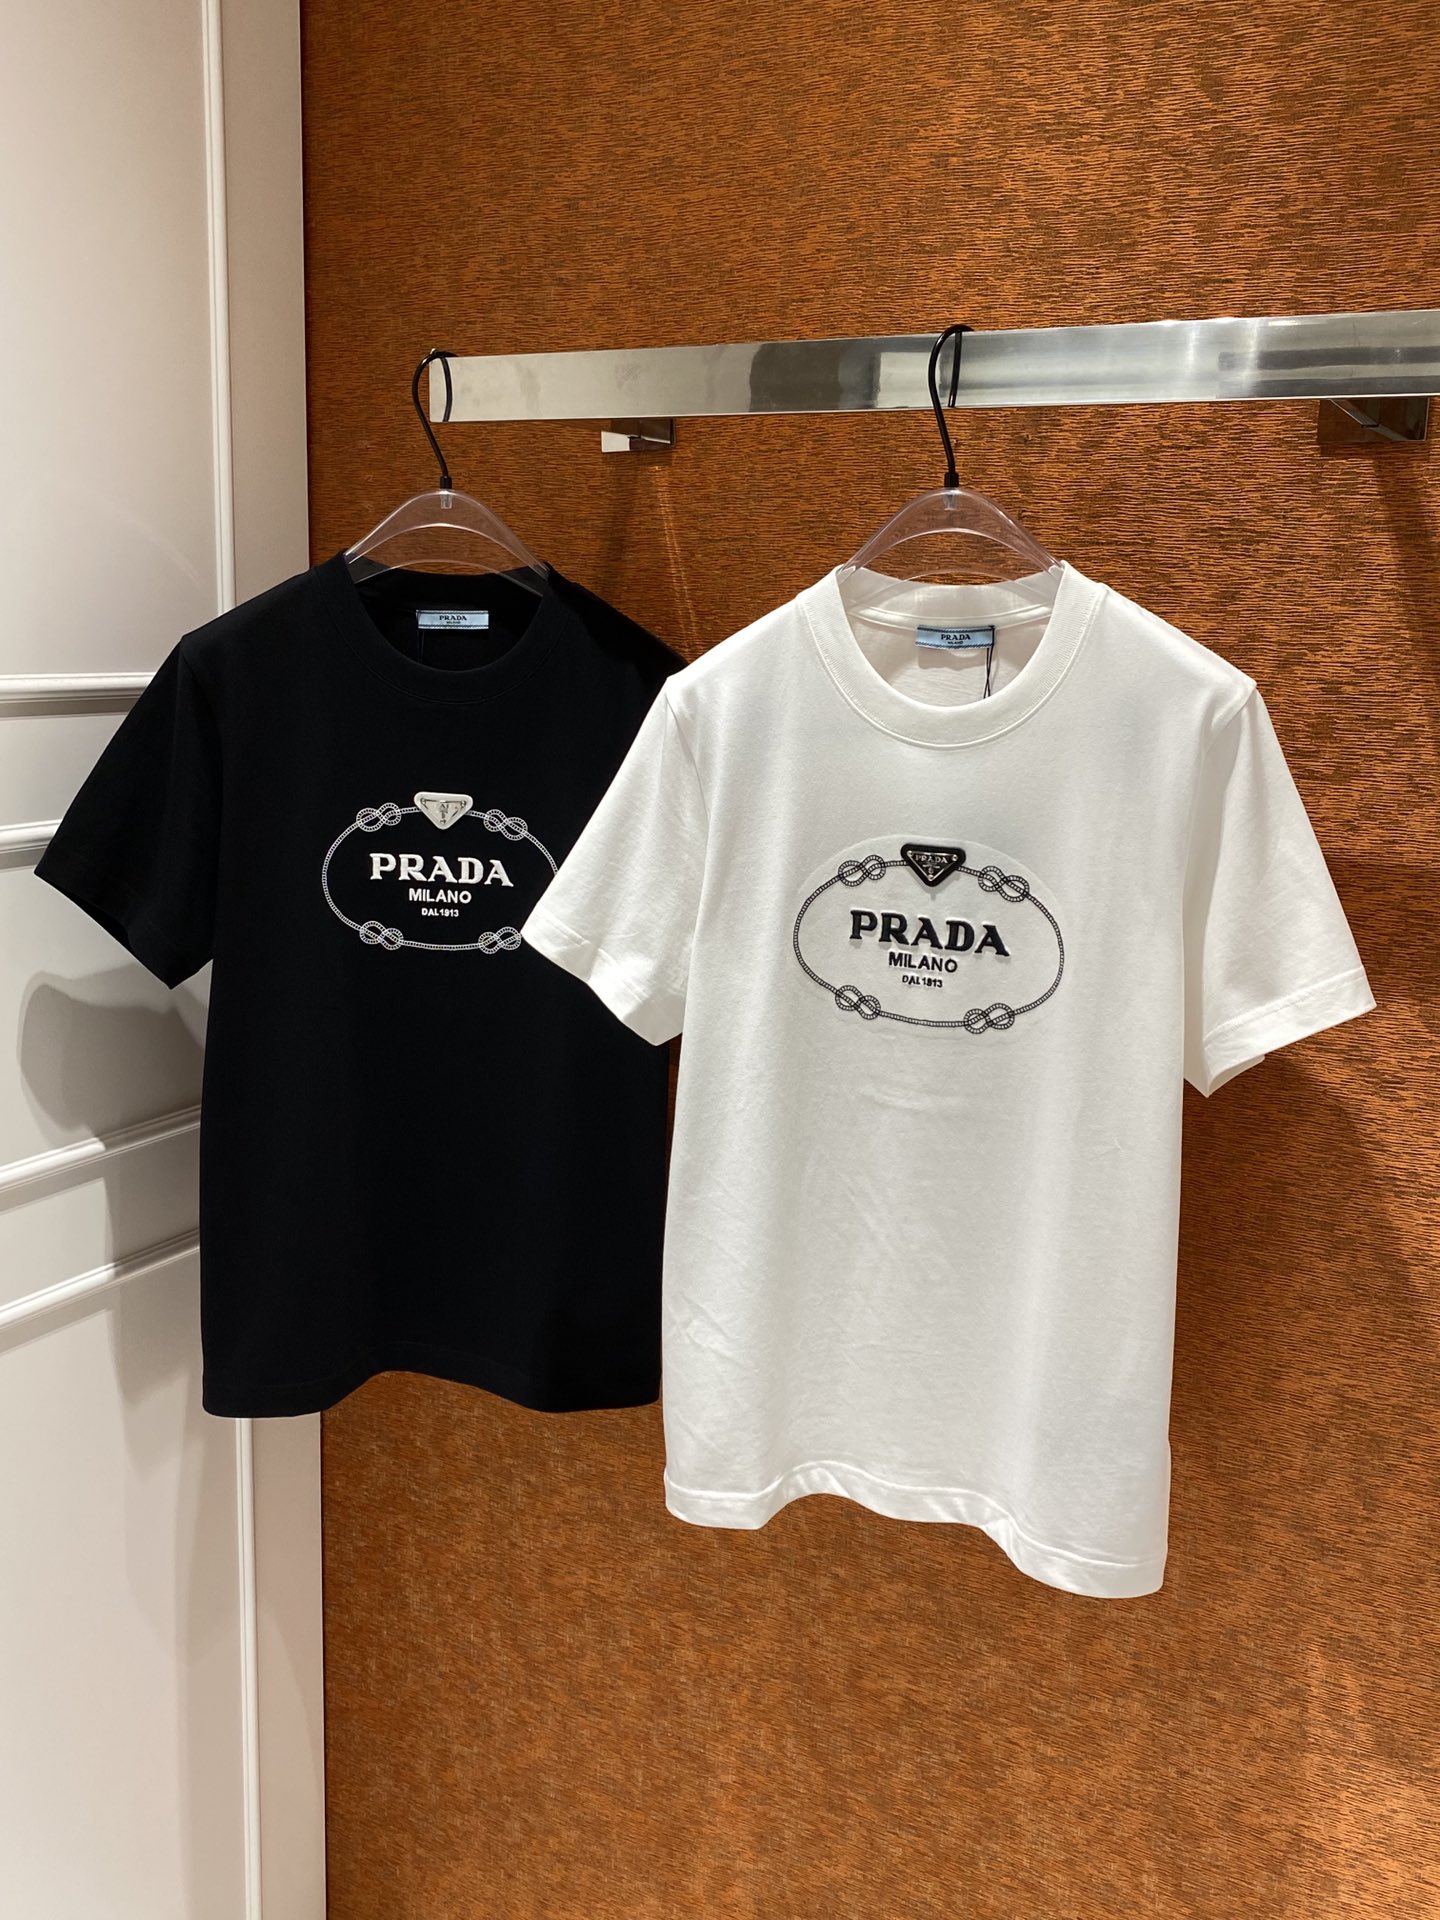 Prada Clothing T-Shirt Best Capucines Replica
 Black White Embroidery Unisex Combed Cotton Summer Collection Short Sleeve